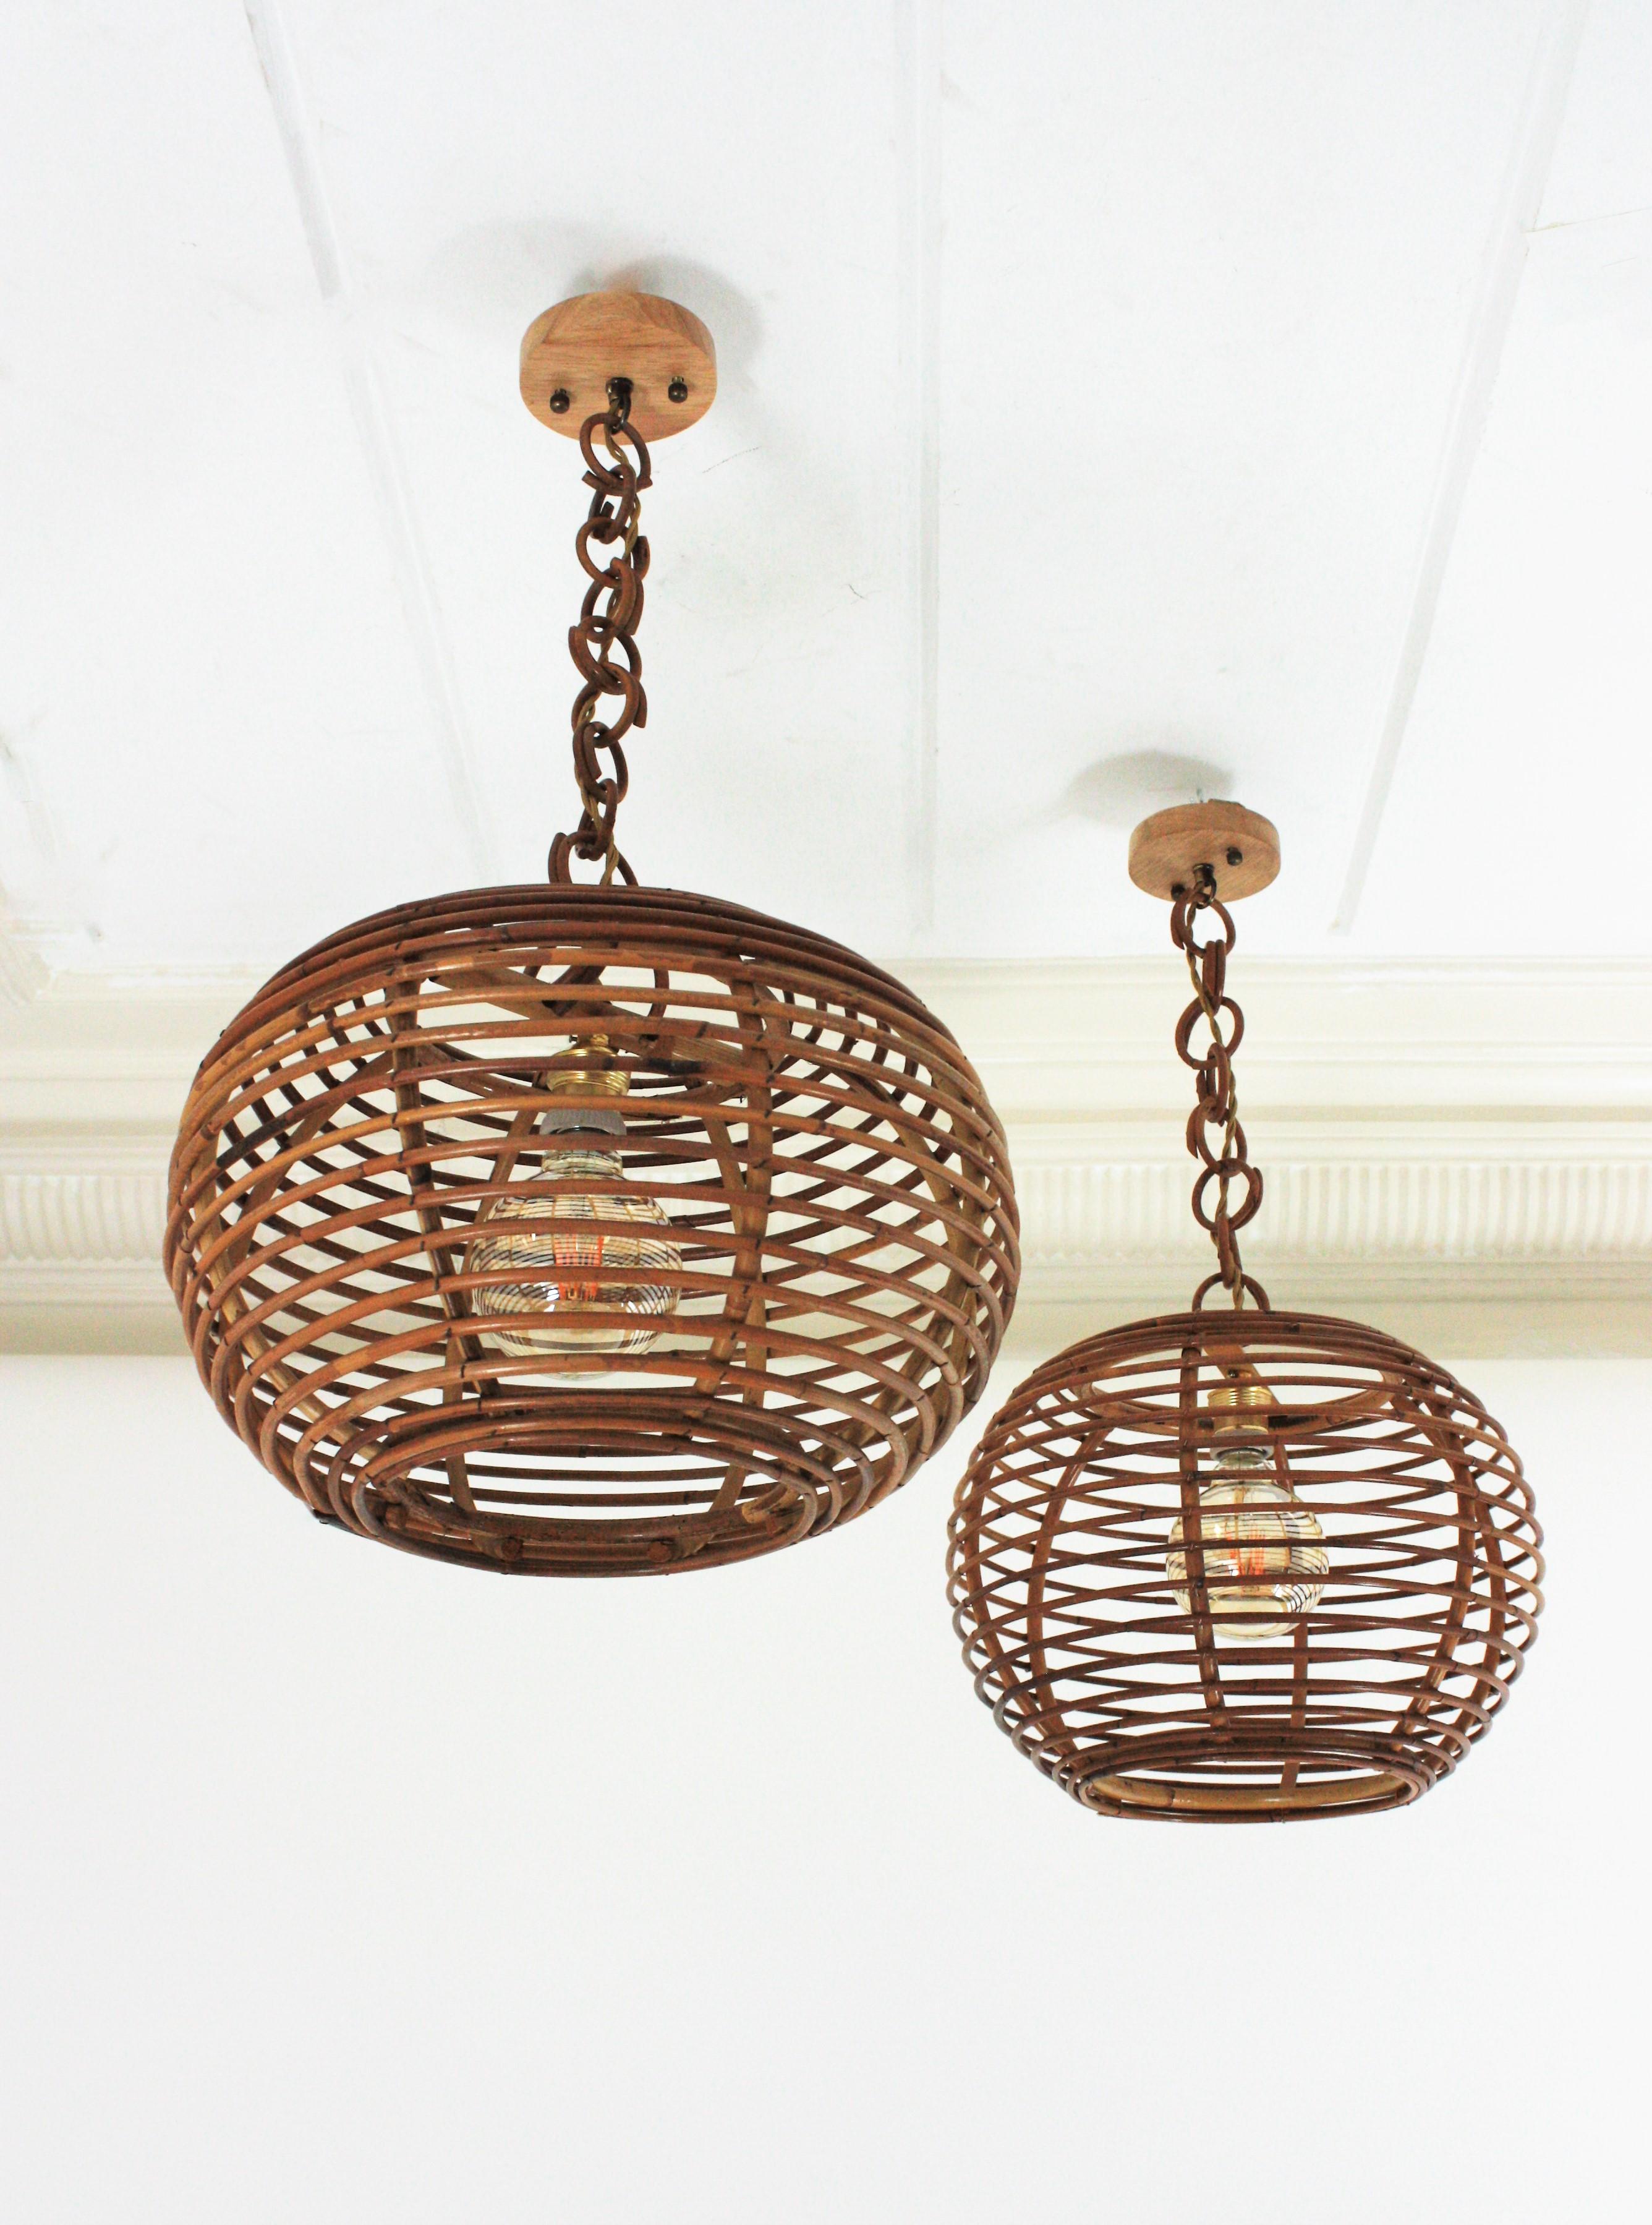 Pair of Rattan Globe Pendants or Hanging Lights, 1950s For Sale 7